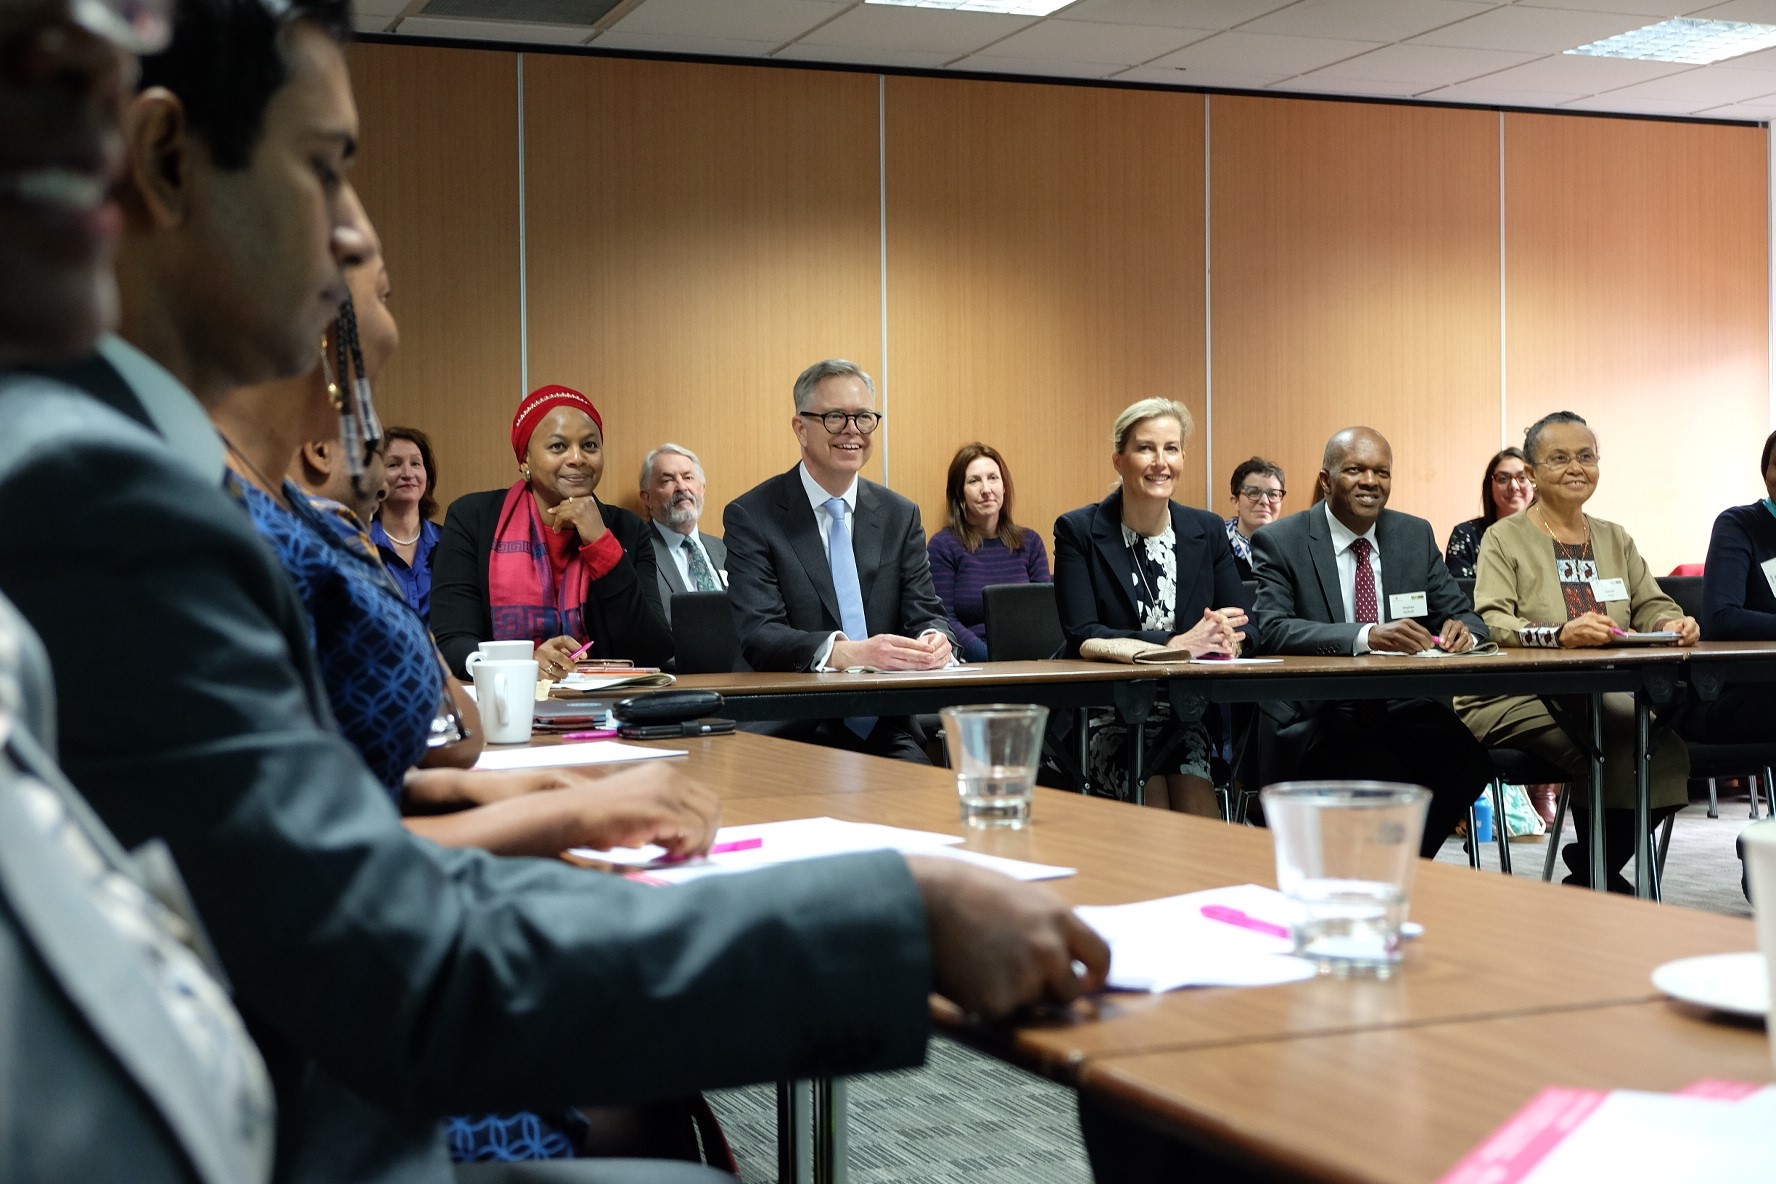 The Countess of Wessex attends The Commonwealth Eye Health Consortium 2019